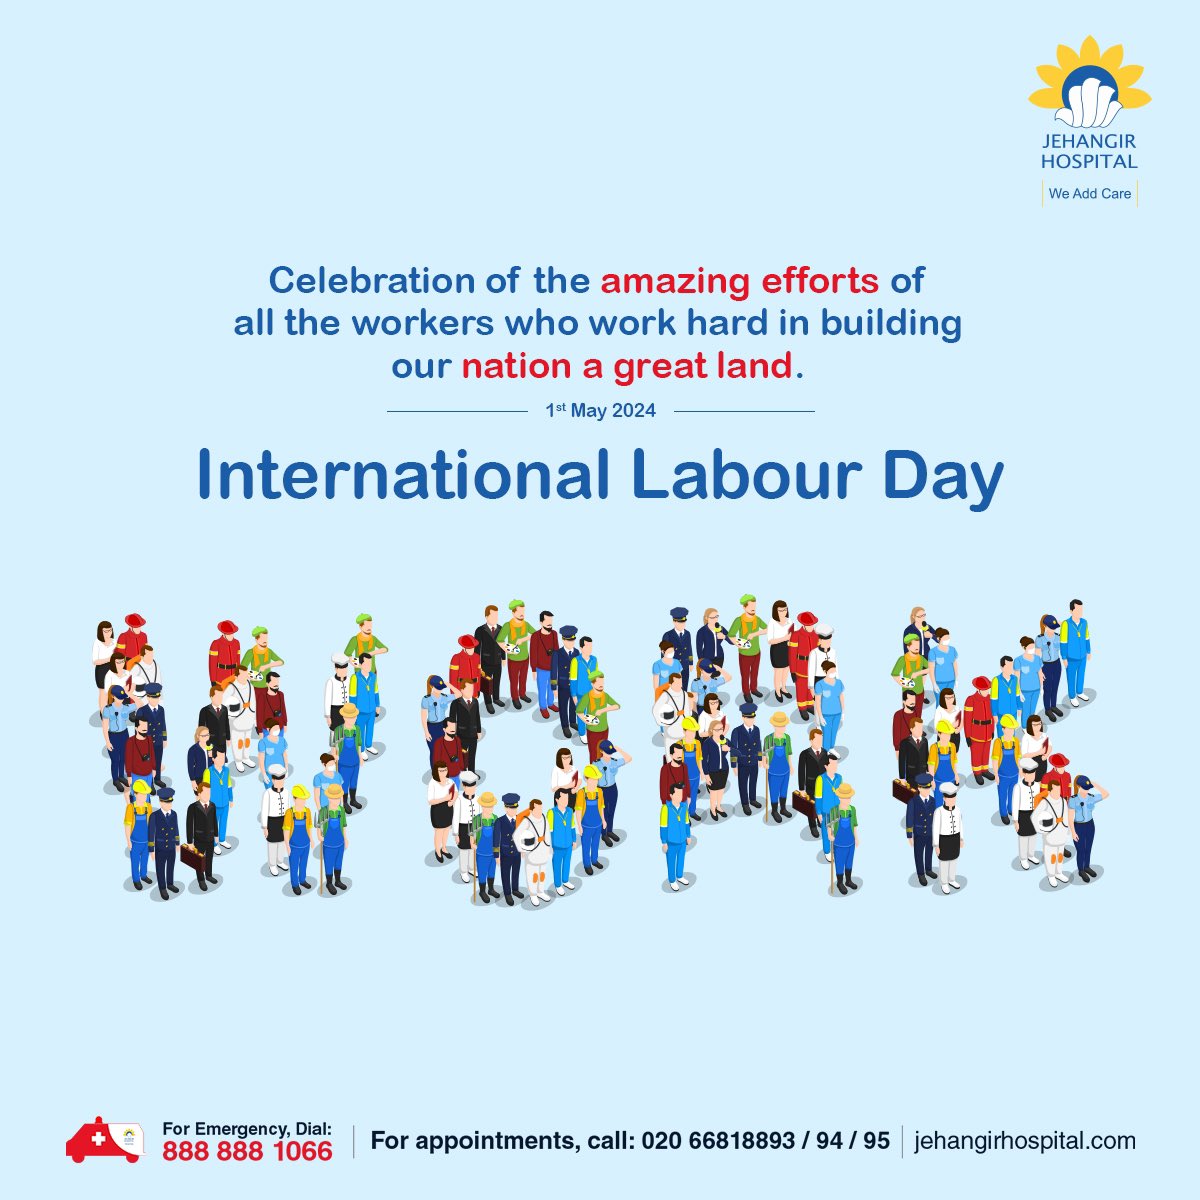 Jehangir Hospital joins in commemorating International Labour Day, a global tribute to the tireless efforts and invaluable contributions of workers everywhere.

#InternationalLabourDay #JehangirHospital #WeAddCare #PatientFirst #LiveHealthy #PatientCare